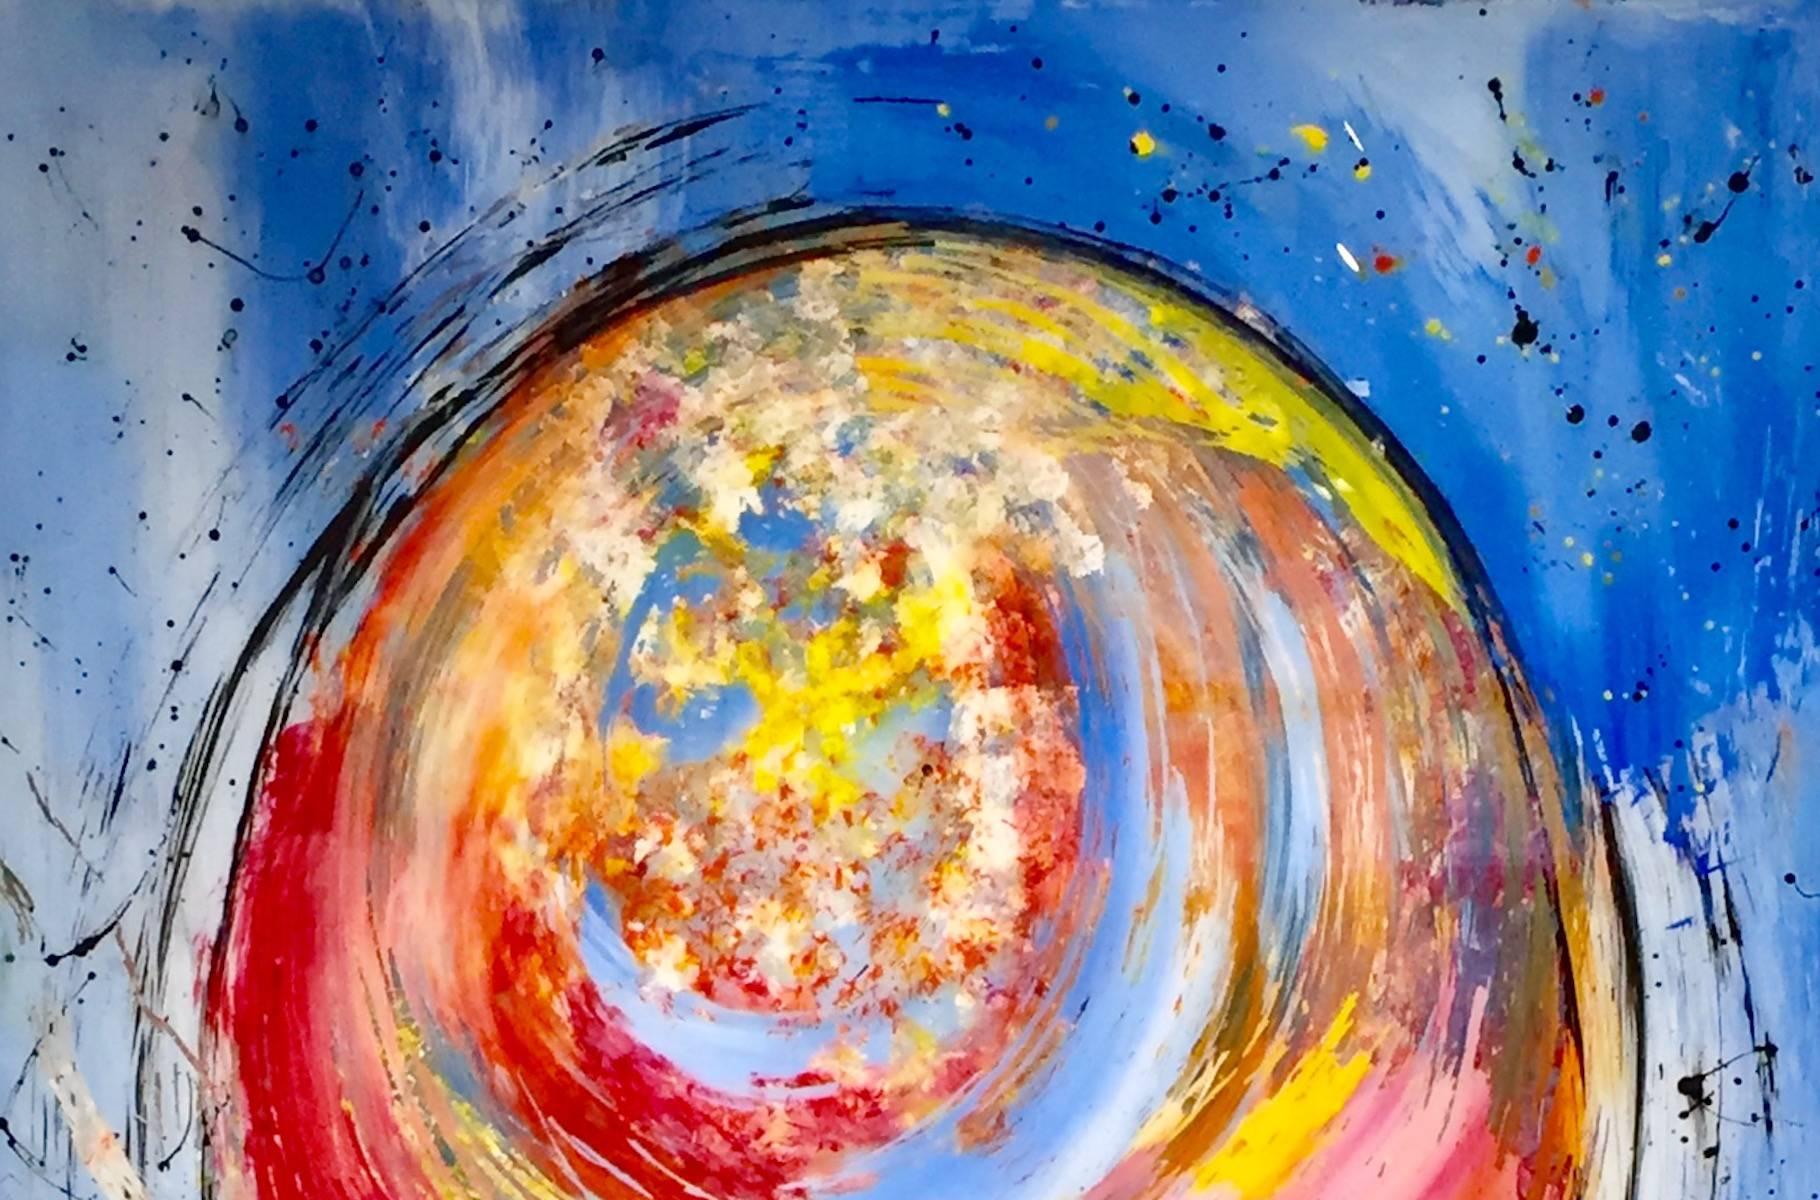 MULTIVERSE I - Painting by Arica Hilton